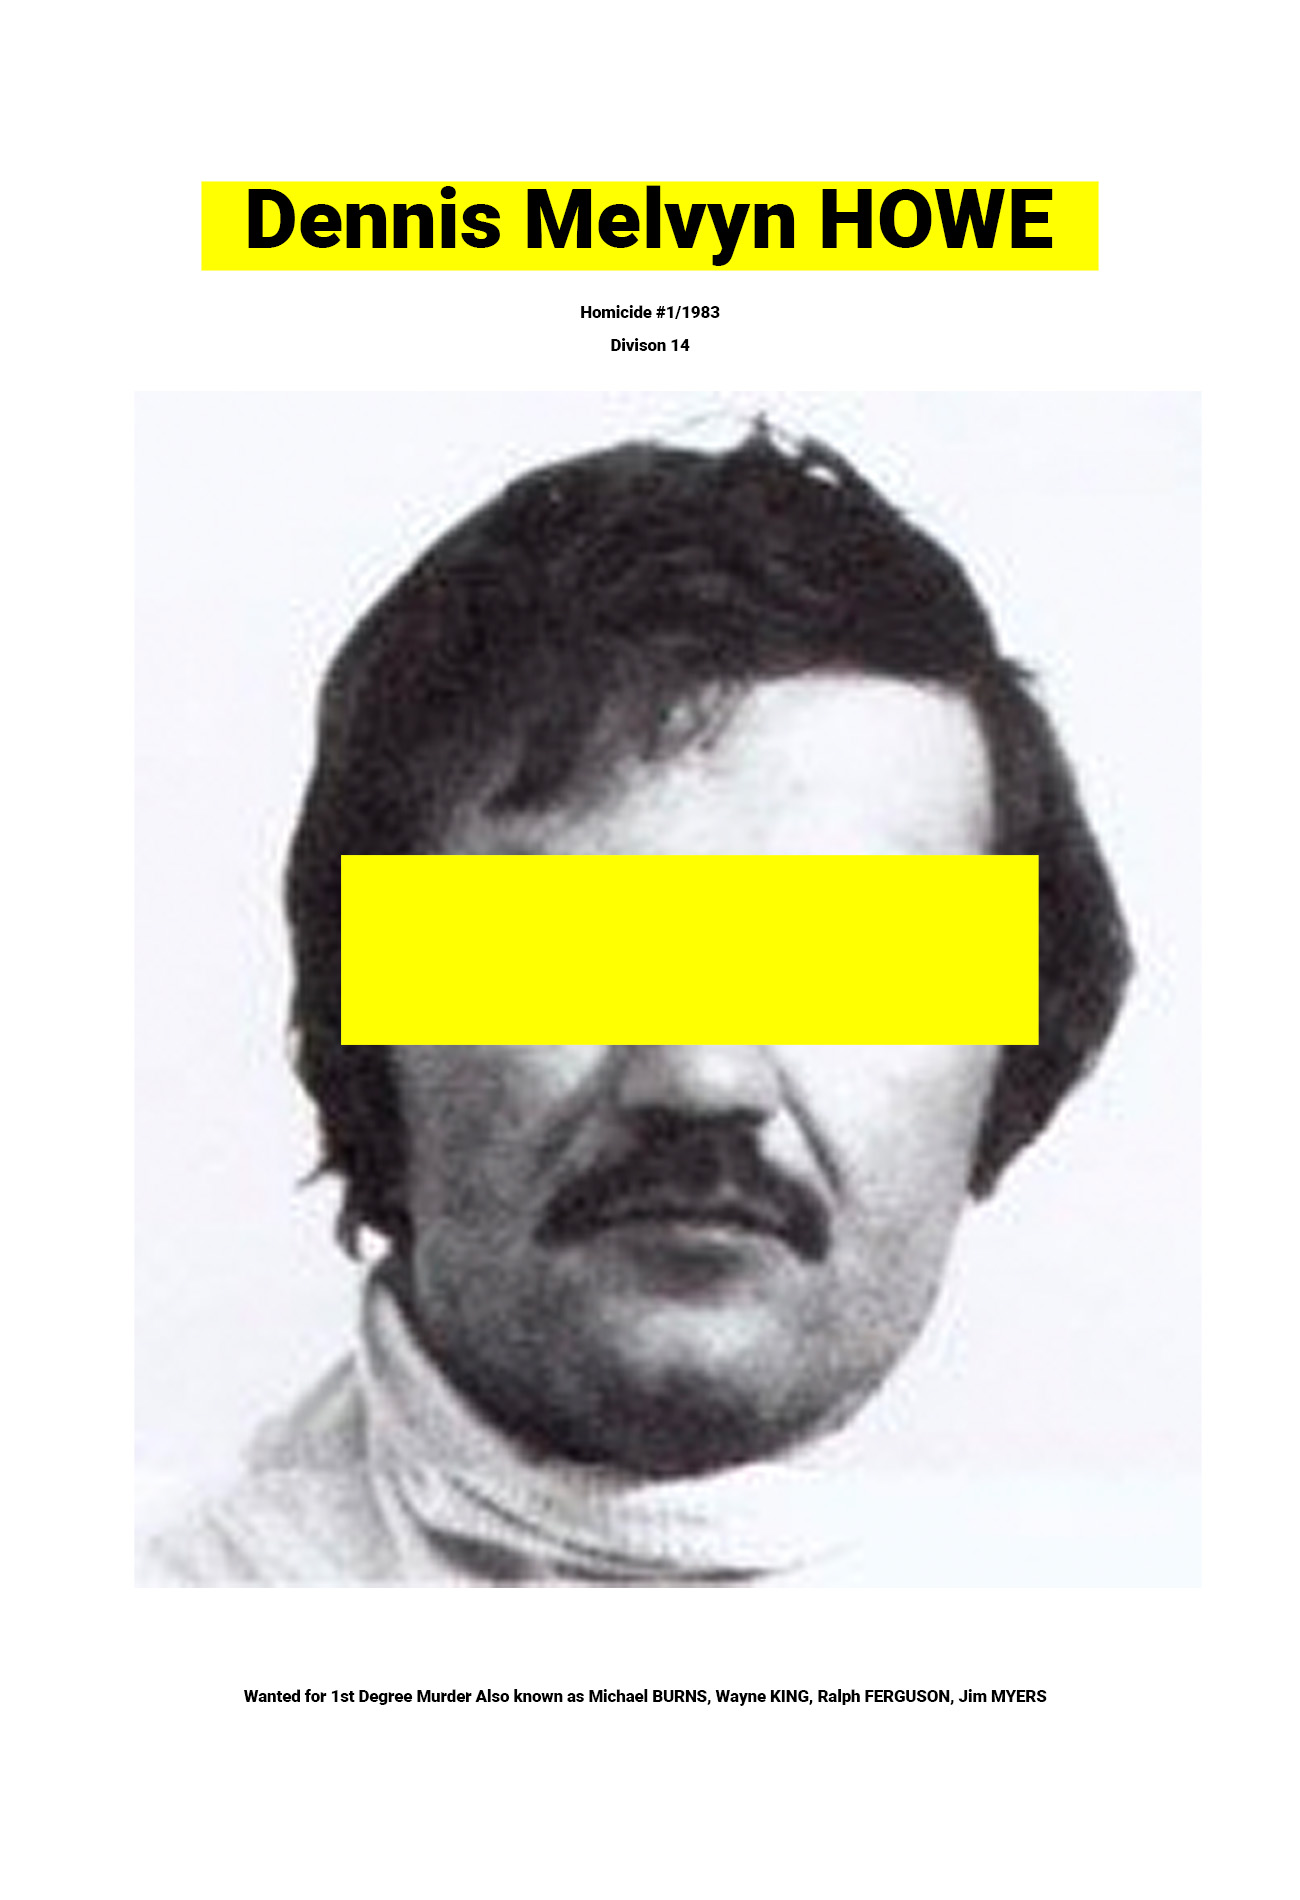 A poster featuring an image of a man with his face partially covered. Text above the image says ‘Homicide #1/1983 Division 14’ and text below the image says ‘Wanted for 1st Degree Murder Also known as Michael BURNS, Wayne KING, Ralph FERGUSON, Jim MYERS’ Howe - A Toronto Star article dated April 23rd, 1983 featuring an article about Dennis Melvyn Howe.